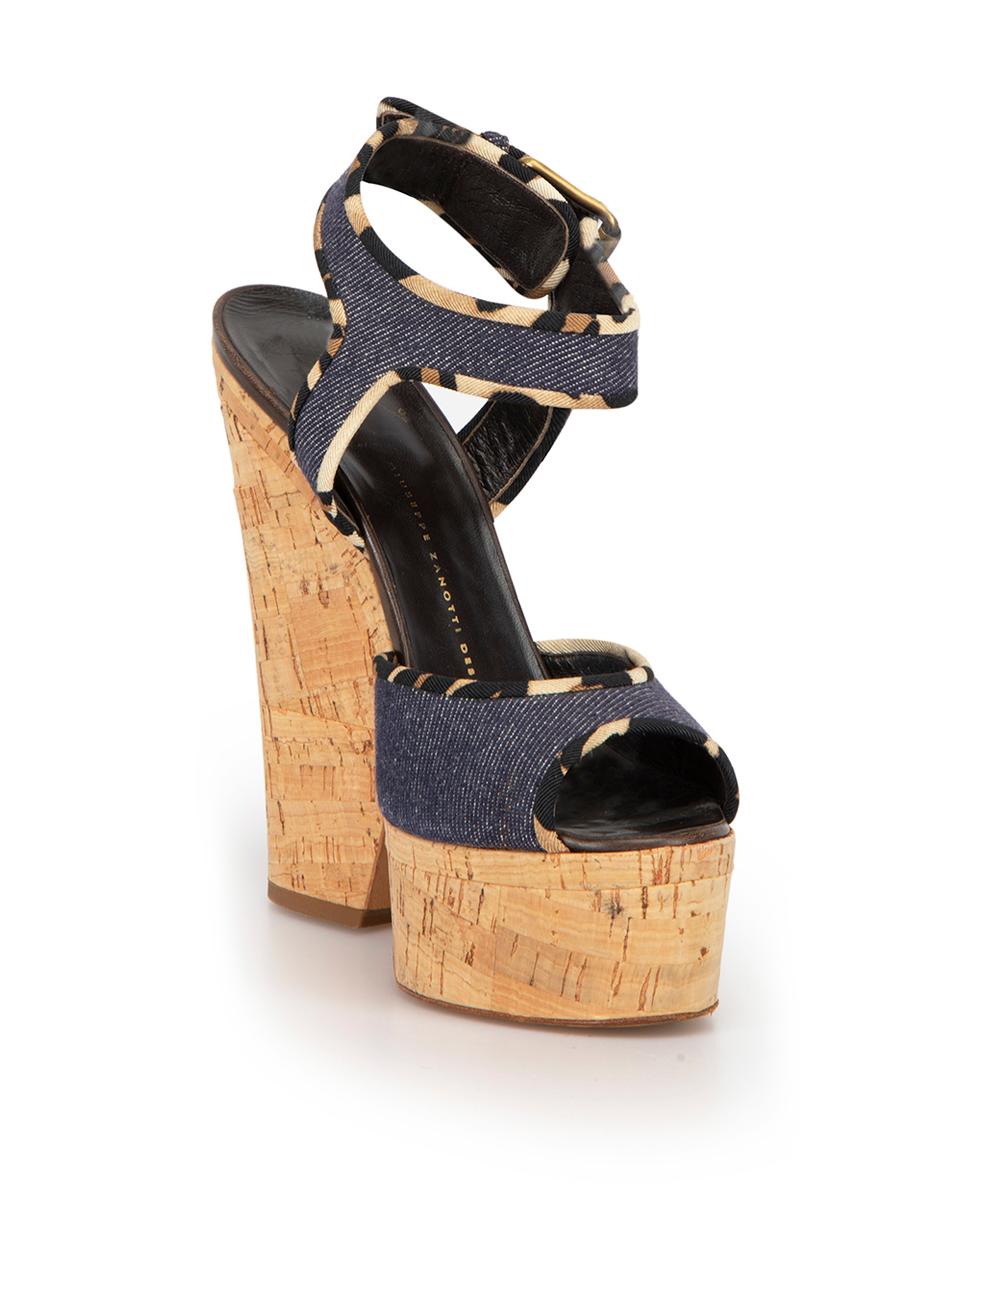 CONDITION is Very good. Minimal wear to shoes is evident. Minimal wear to the leather trim at both heels with scuffing on this used Giuseppe Zanotti designer resale item. 



Details


Blue and Beige

Denim and Cork  

Platform Wedges

Peep